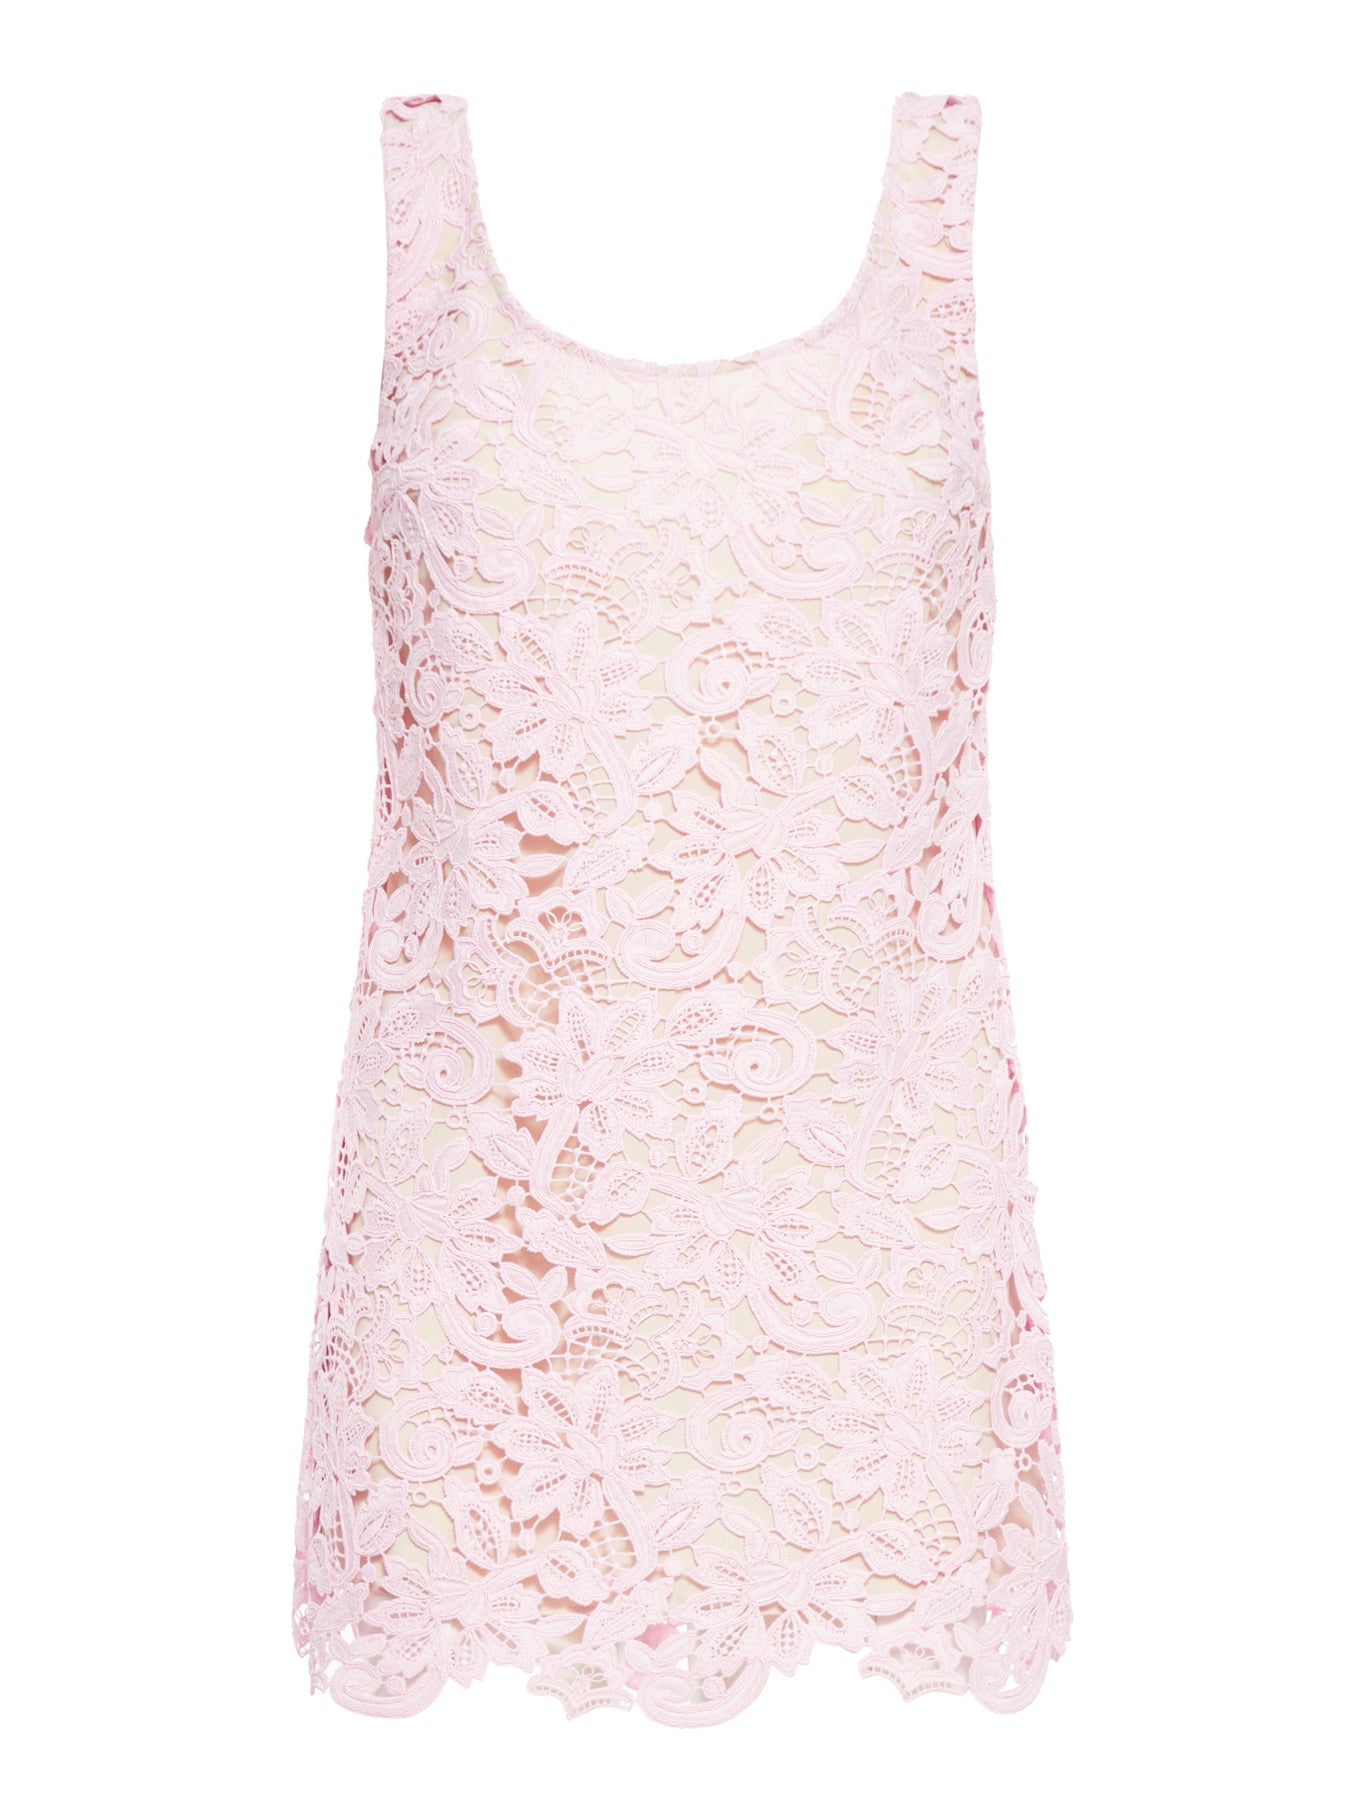 LACE MINIDRESS IN PINK